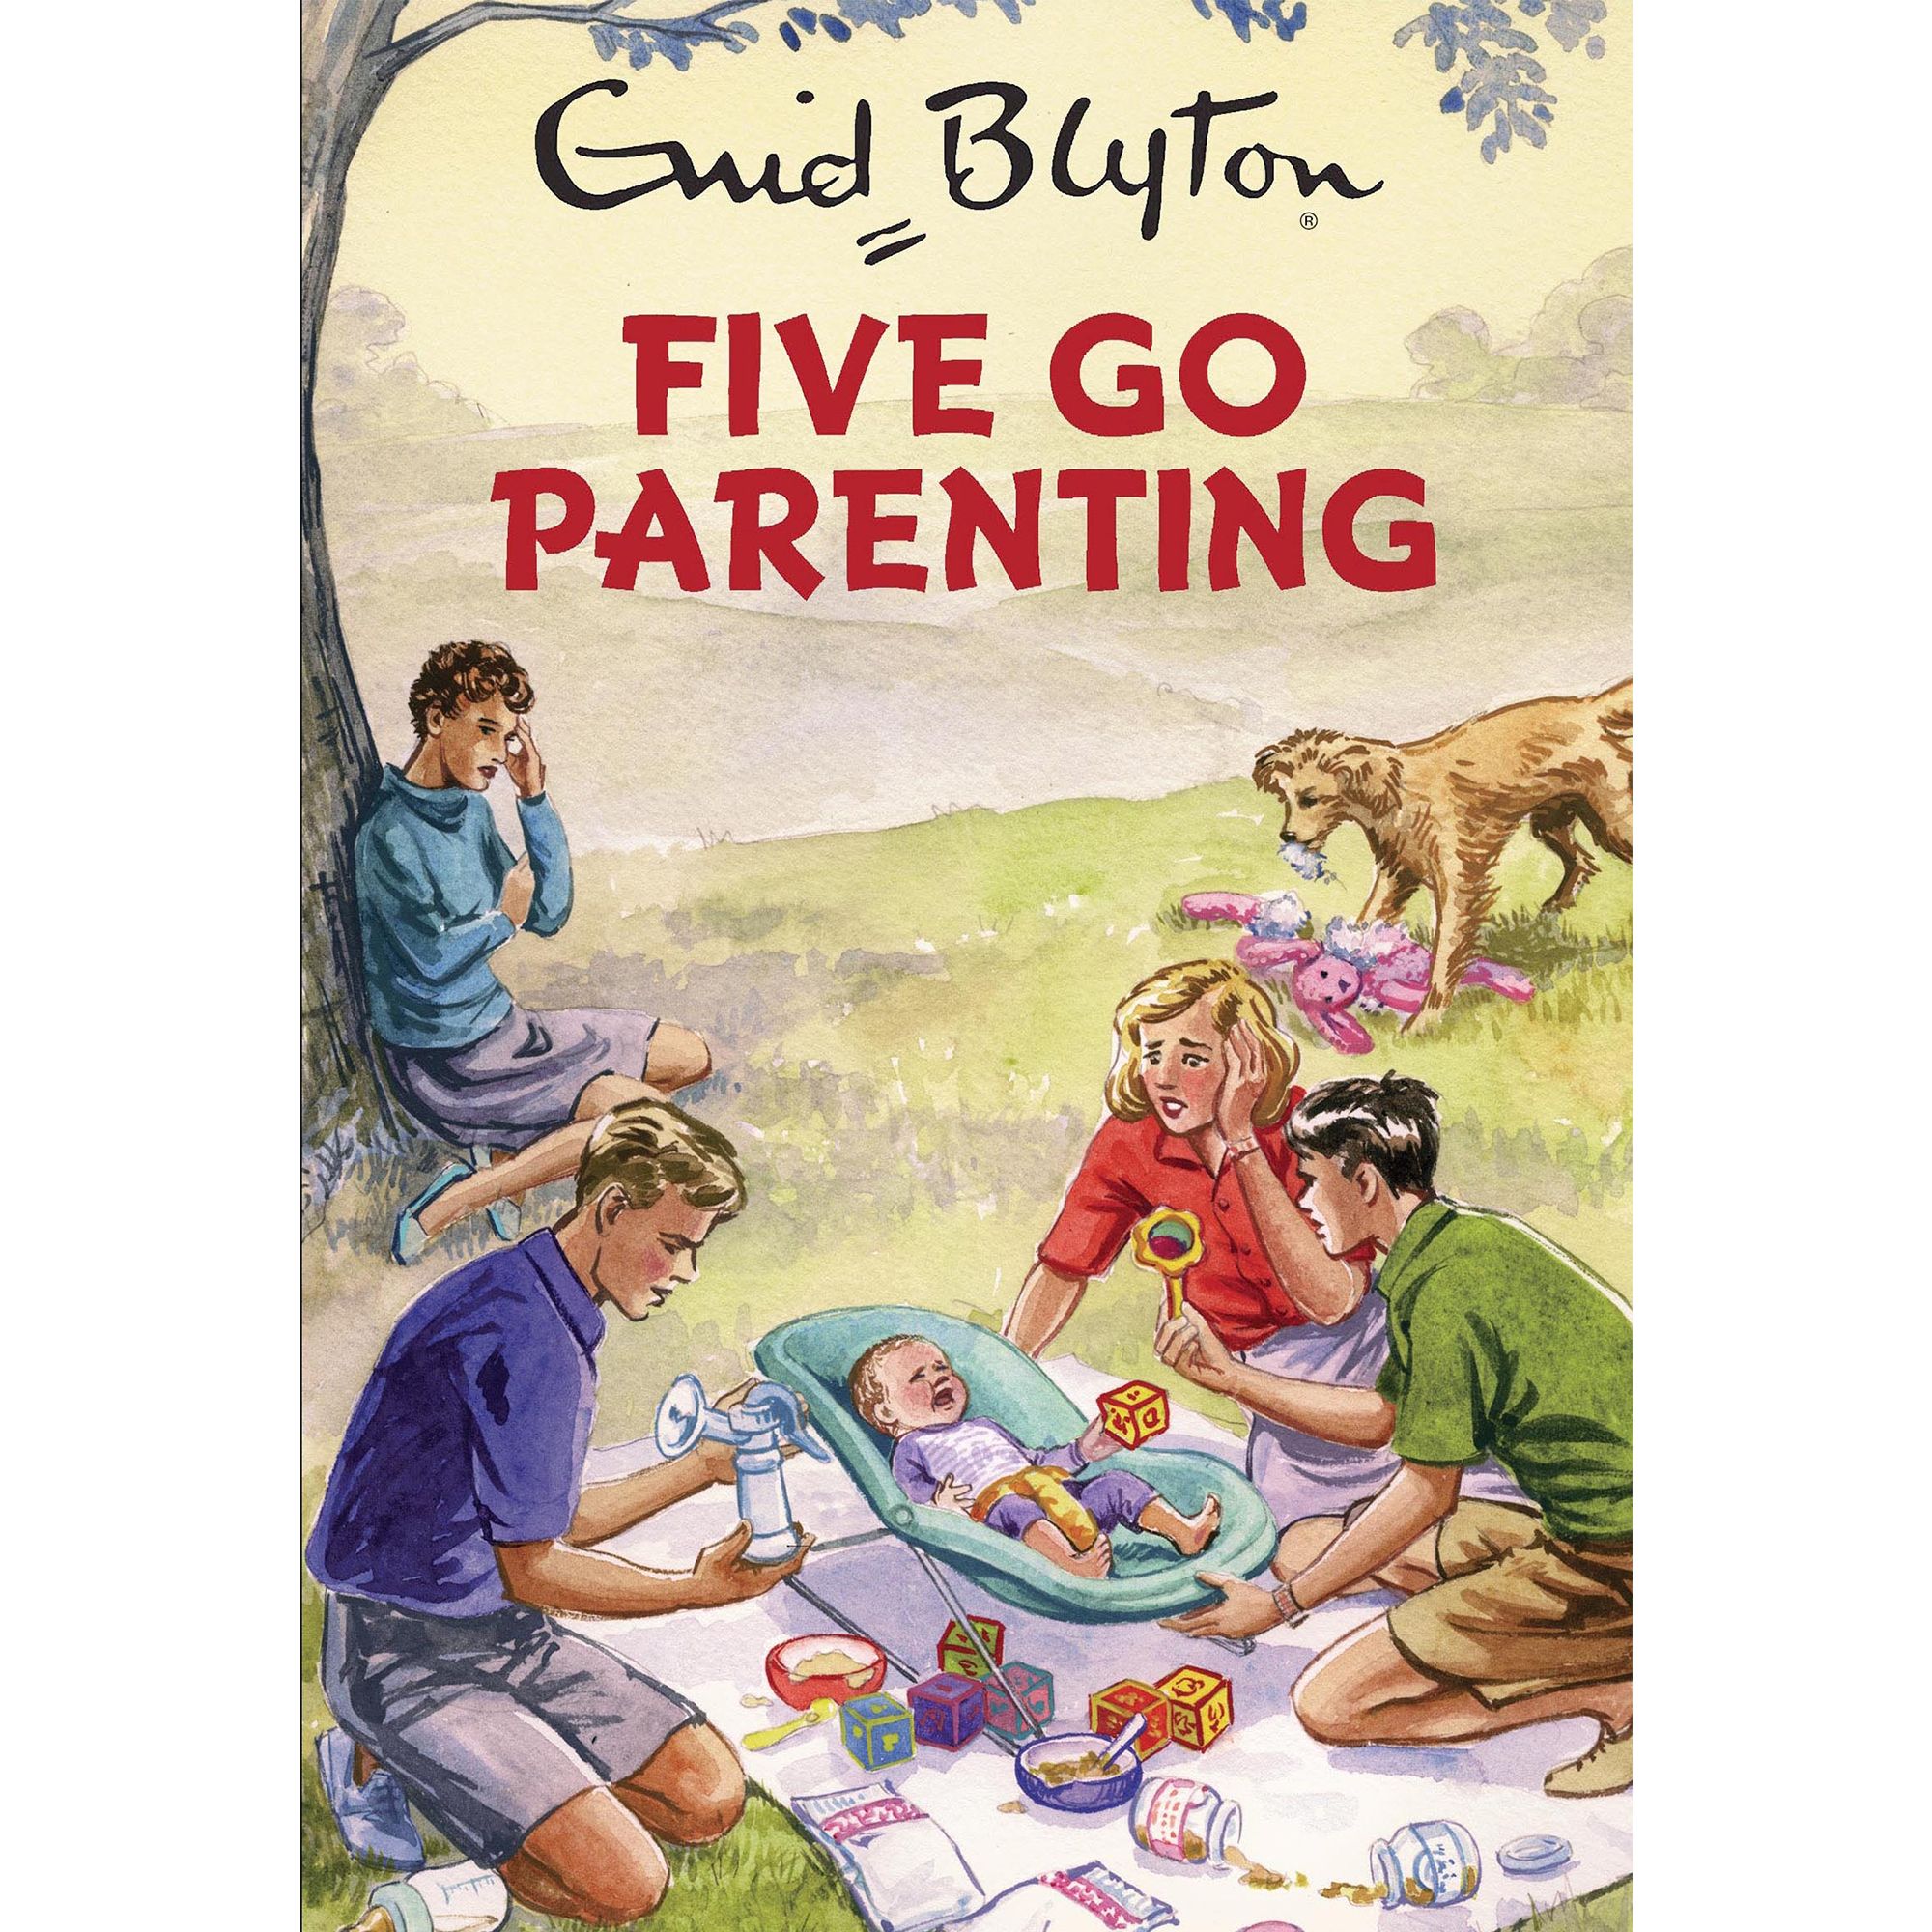 My parents go goes to work. Jamie Blyton. Blyton сумка. Parenting books. World if parents went to Therapy.